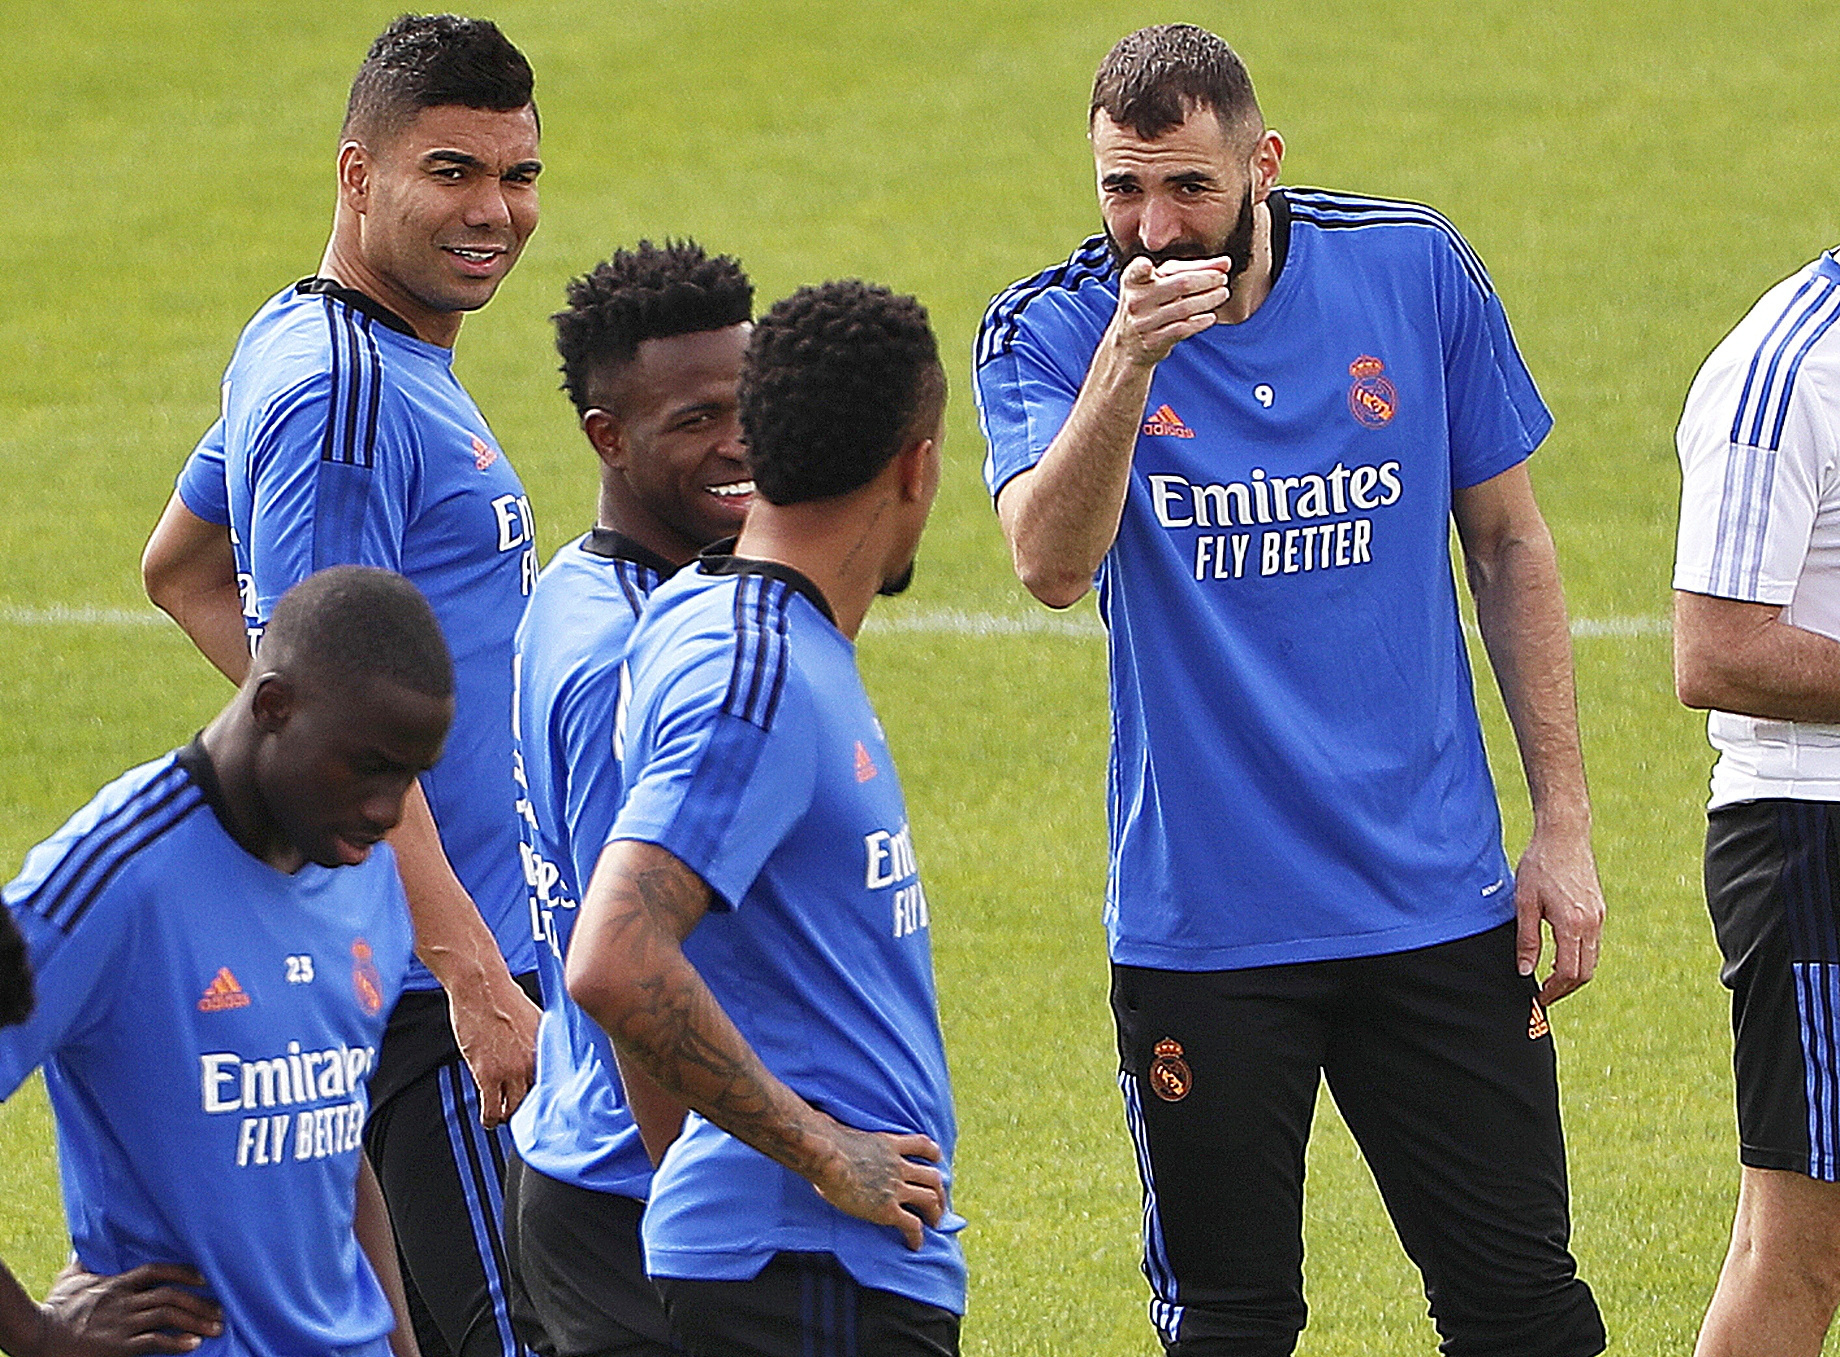 Casemiro, Vinicius and Militao, from behind, next to Benzema.